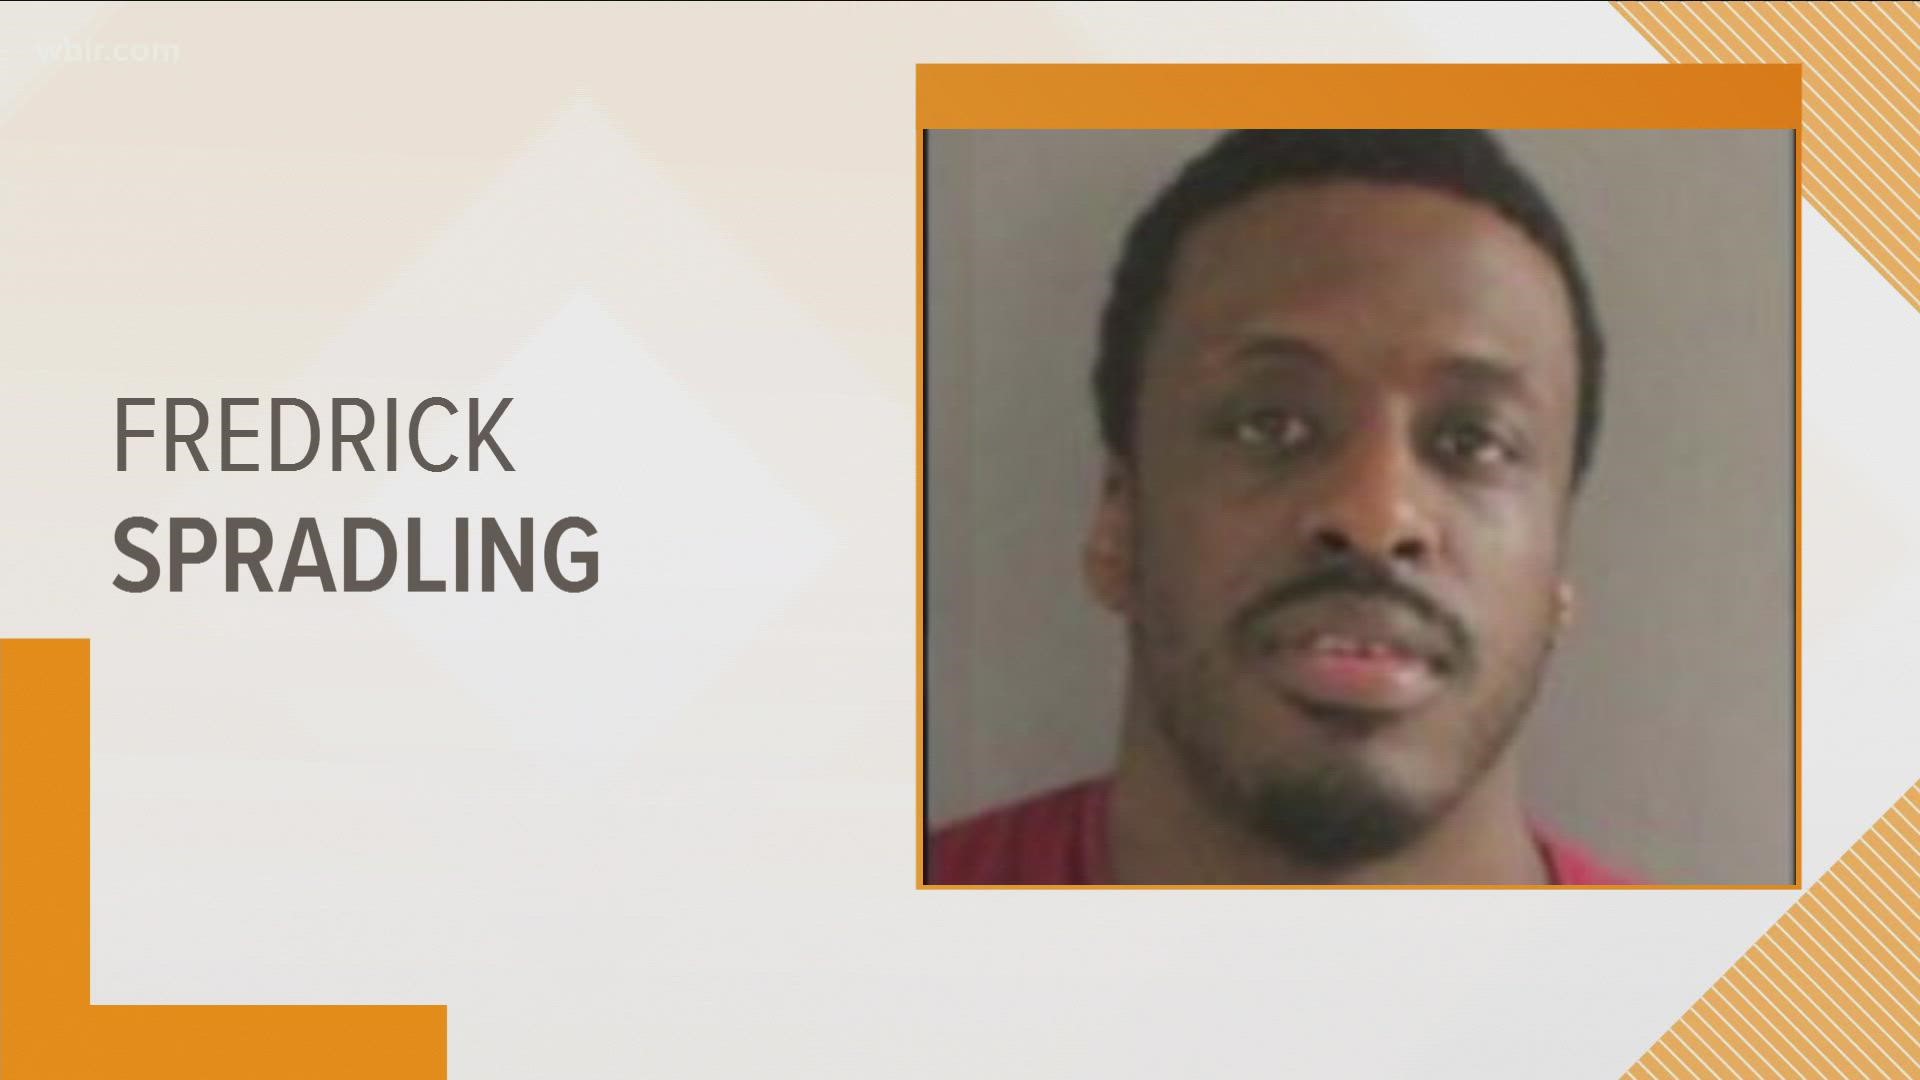 Fredrick Spradling was seen driving a vehicle with bullet holes